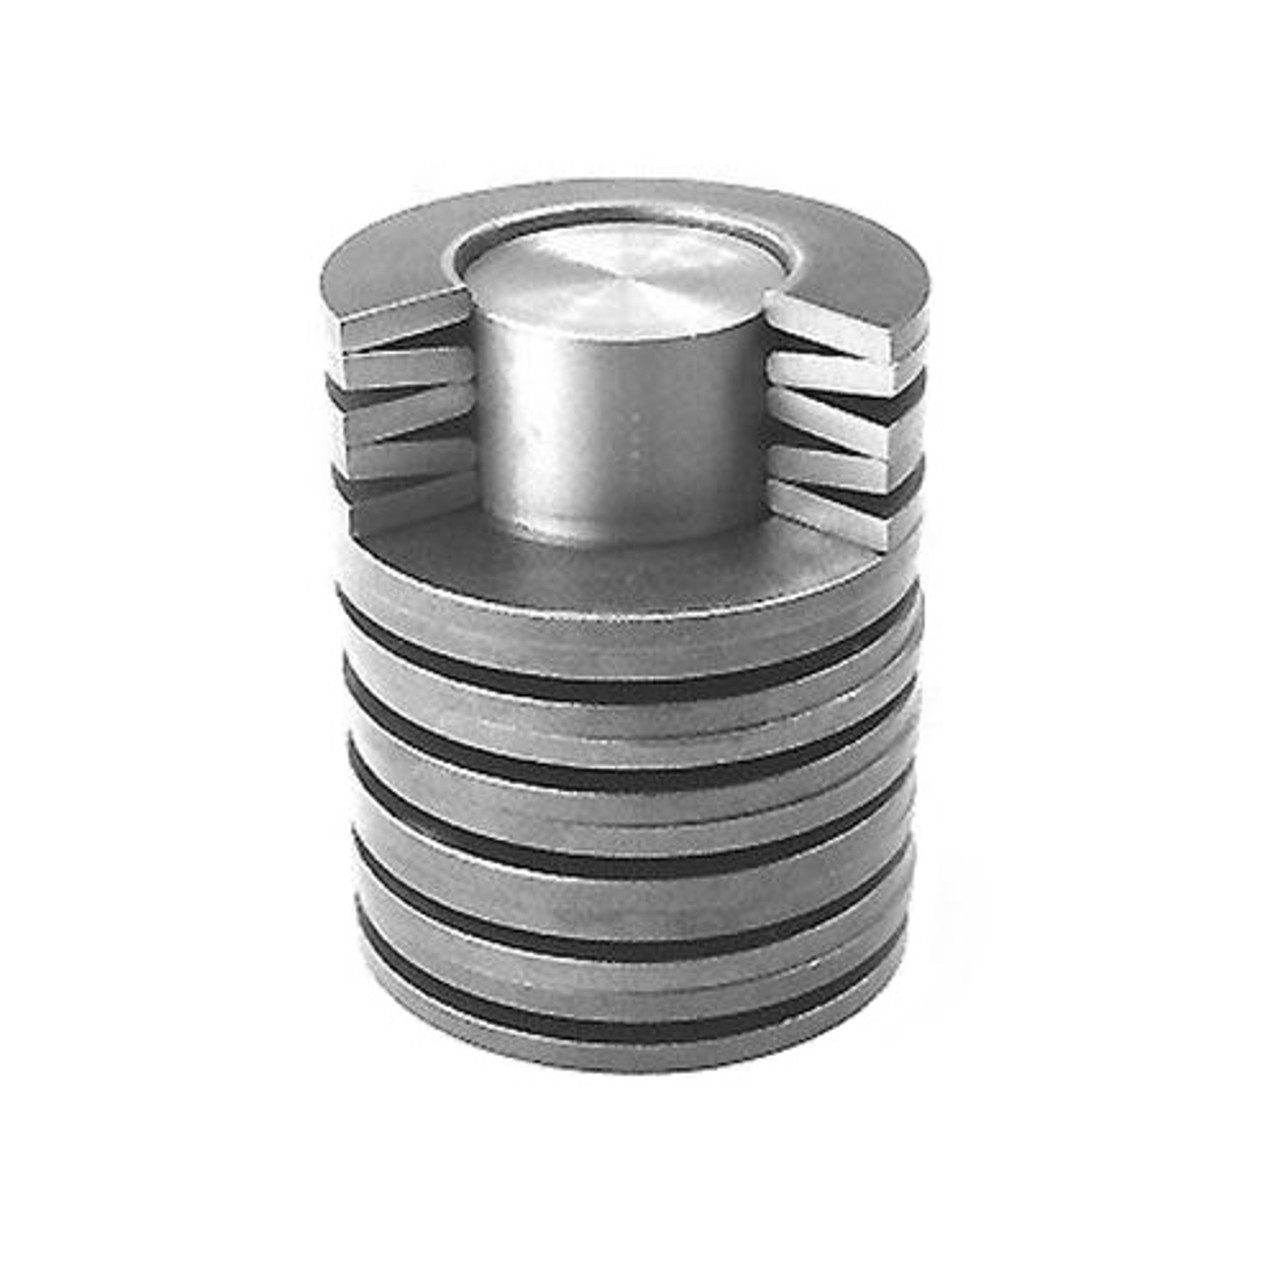 4mm Disc Spring (DIN 2093) Conical Washer  DS004.2-008-02